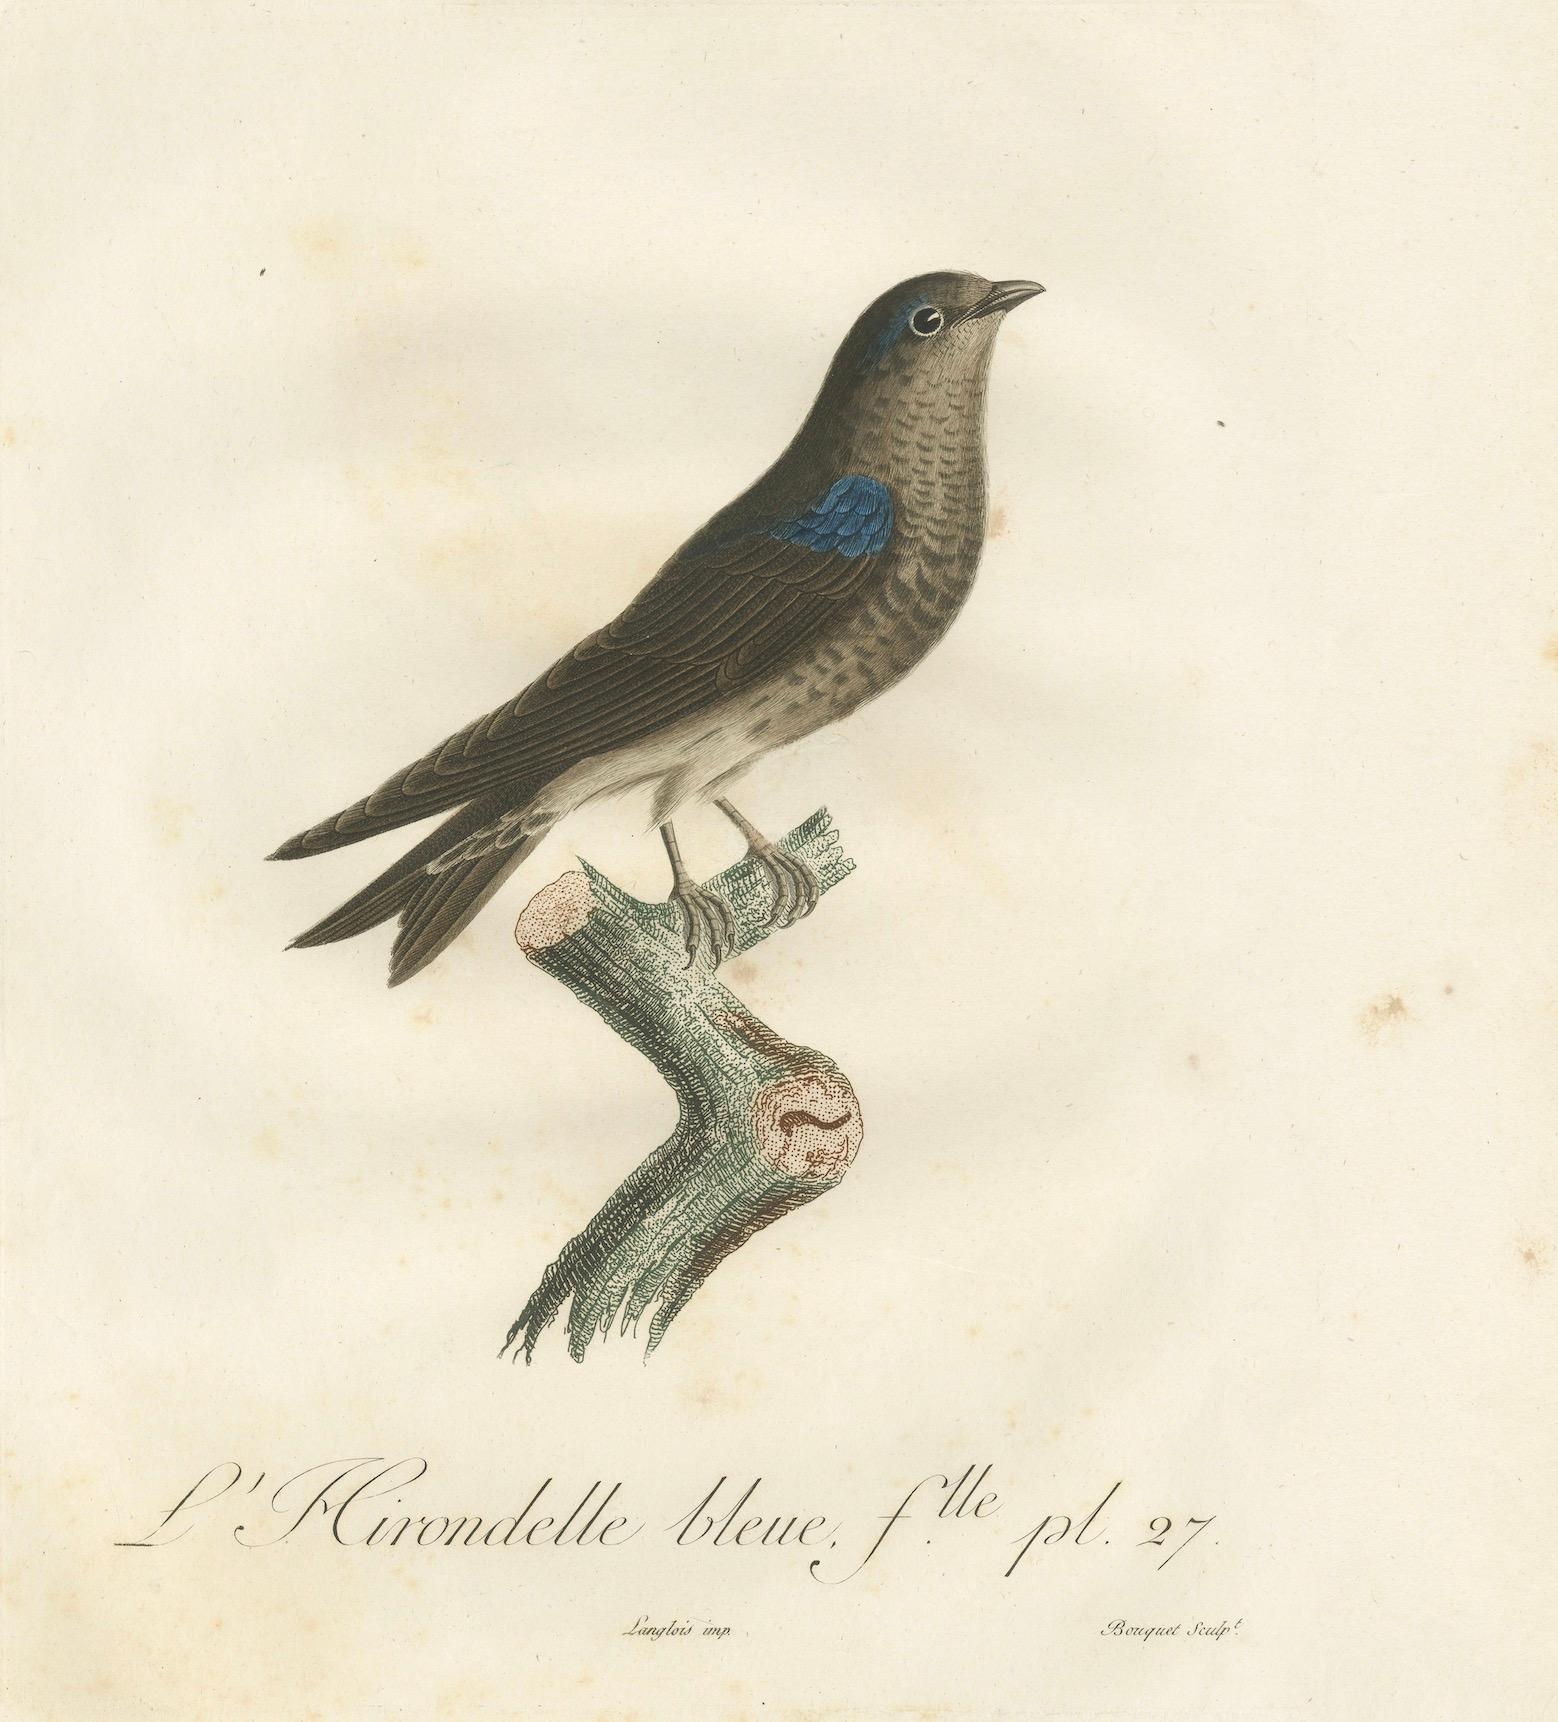 Feathered Sapphire: The Blue Swallow – A Vieillot Hand-Colored Print from 1807 For Sale 2